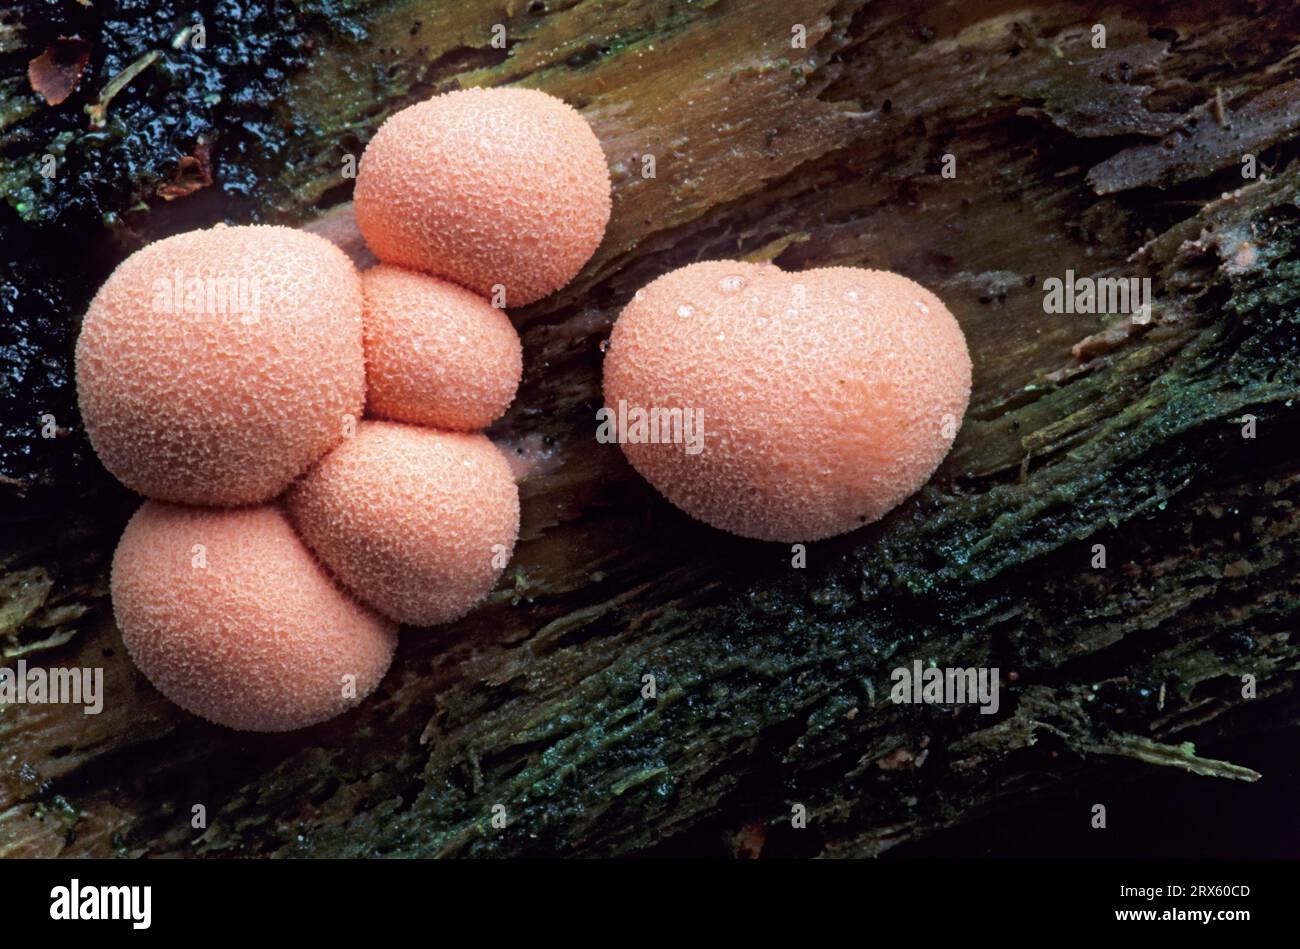 Earth milk fungus is a slime fungus and can be classified as protozoon, Wolfs Milk is a slime fungus and to be classified as protozoon, Lycogala Stock Photo